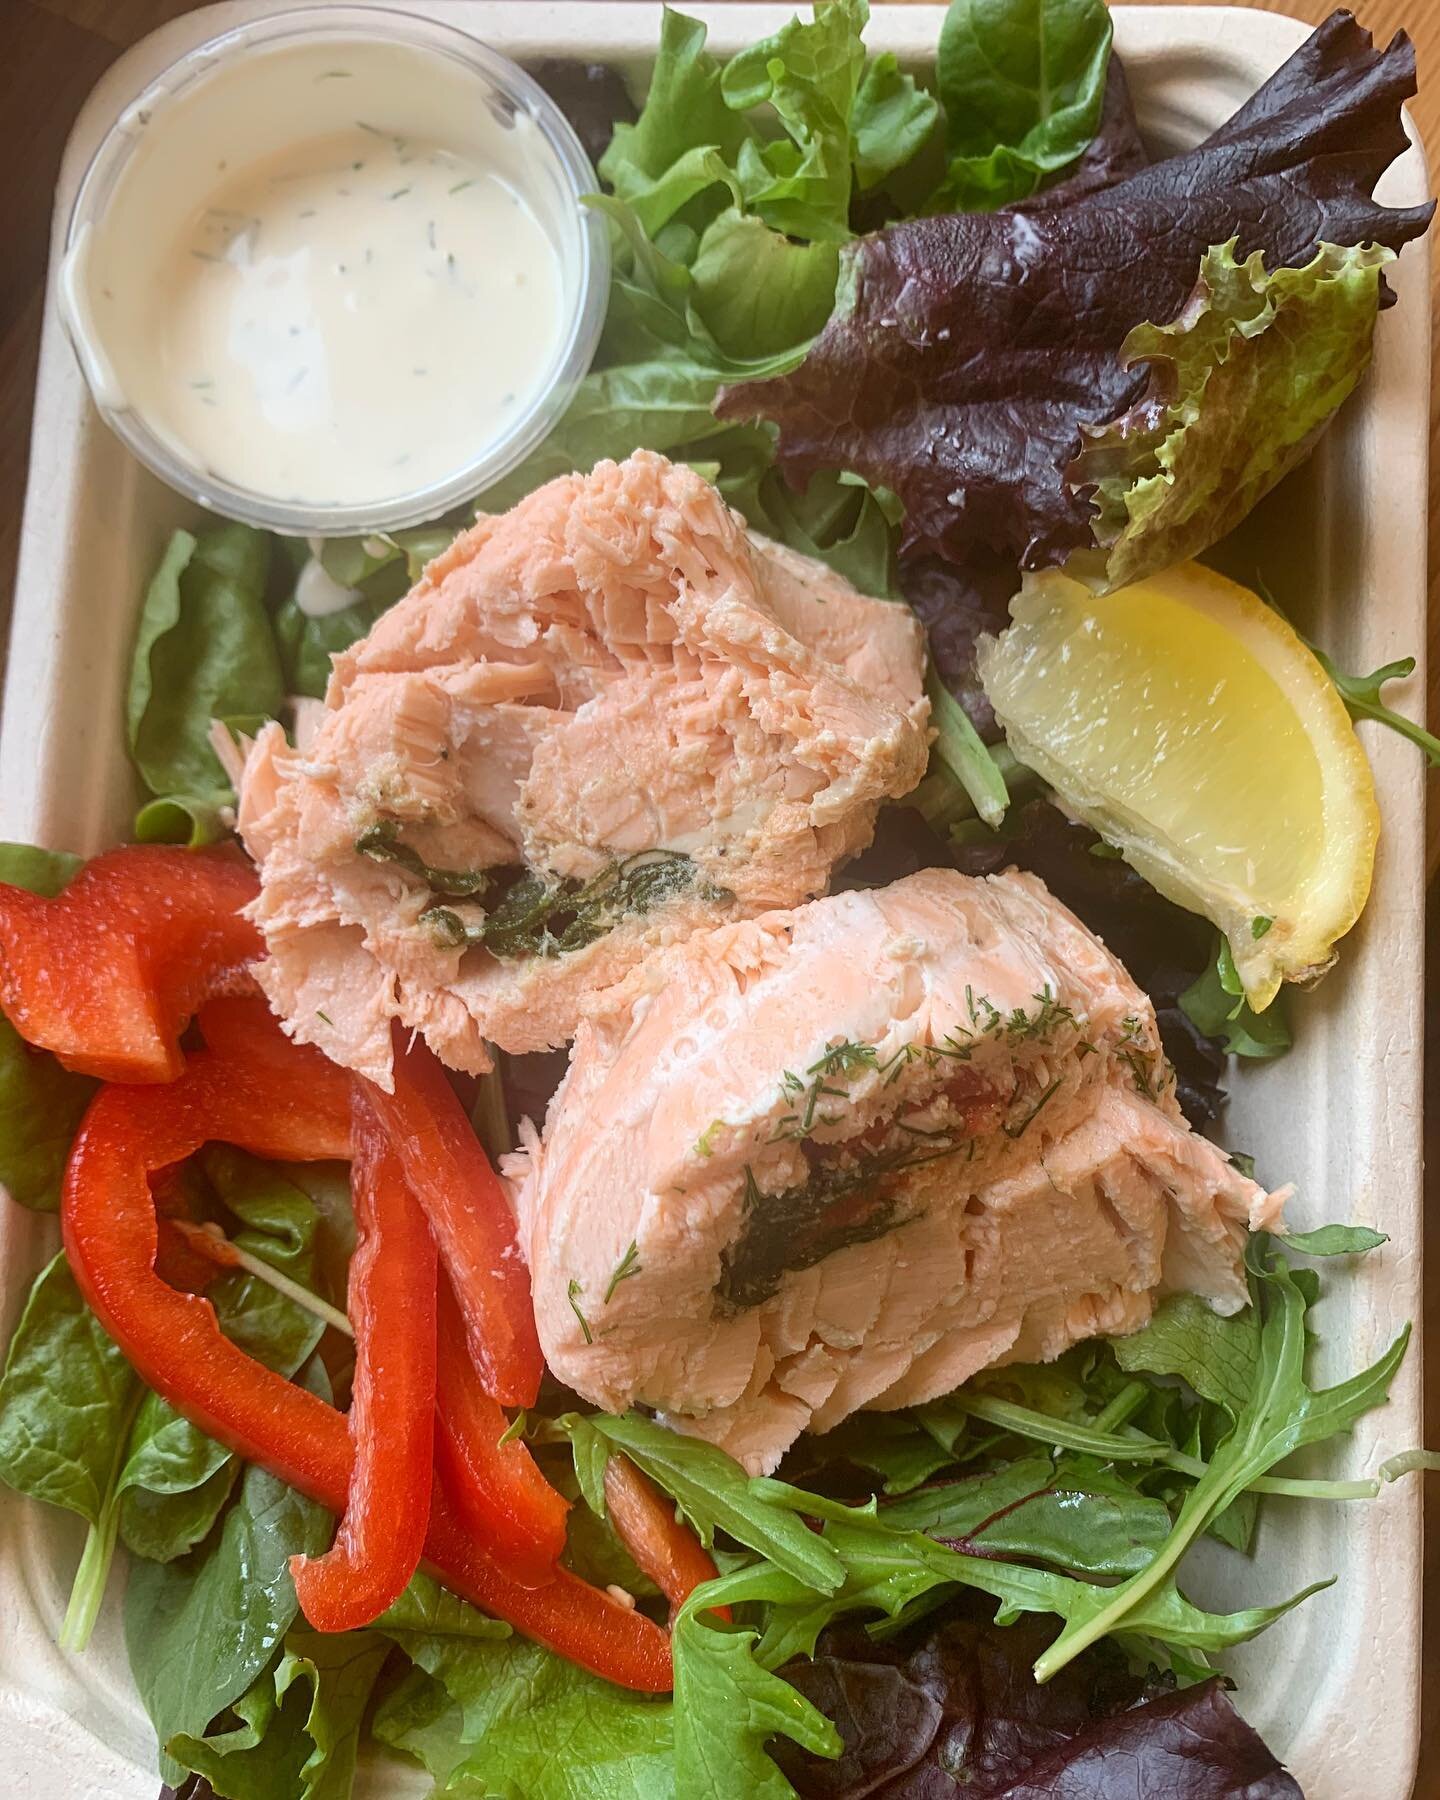 The first of many summer platters to come: poached Salmon &amp; Leon Dill sauce 😋 absolutely delicious! New this weekend!